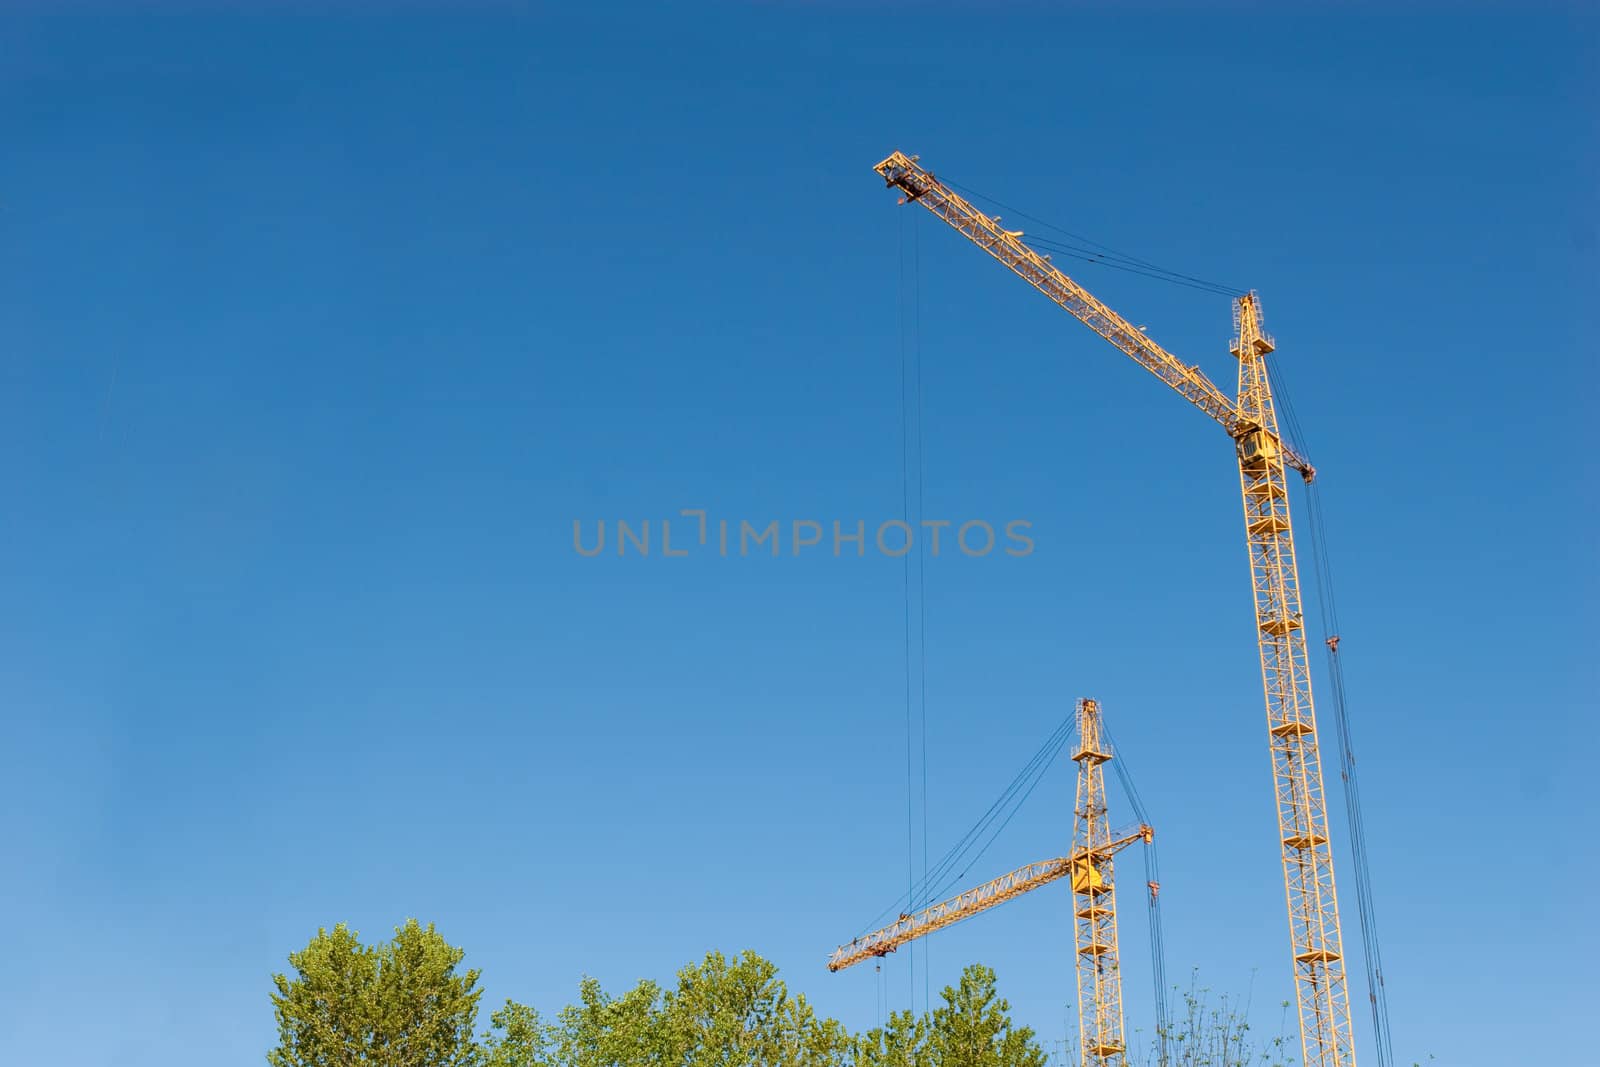 two hoisting cranes and the sky